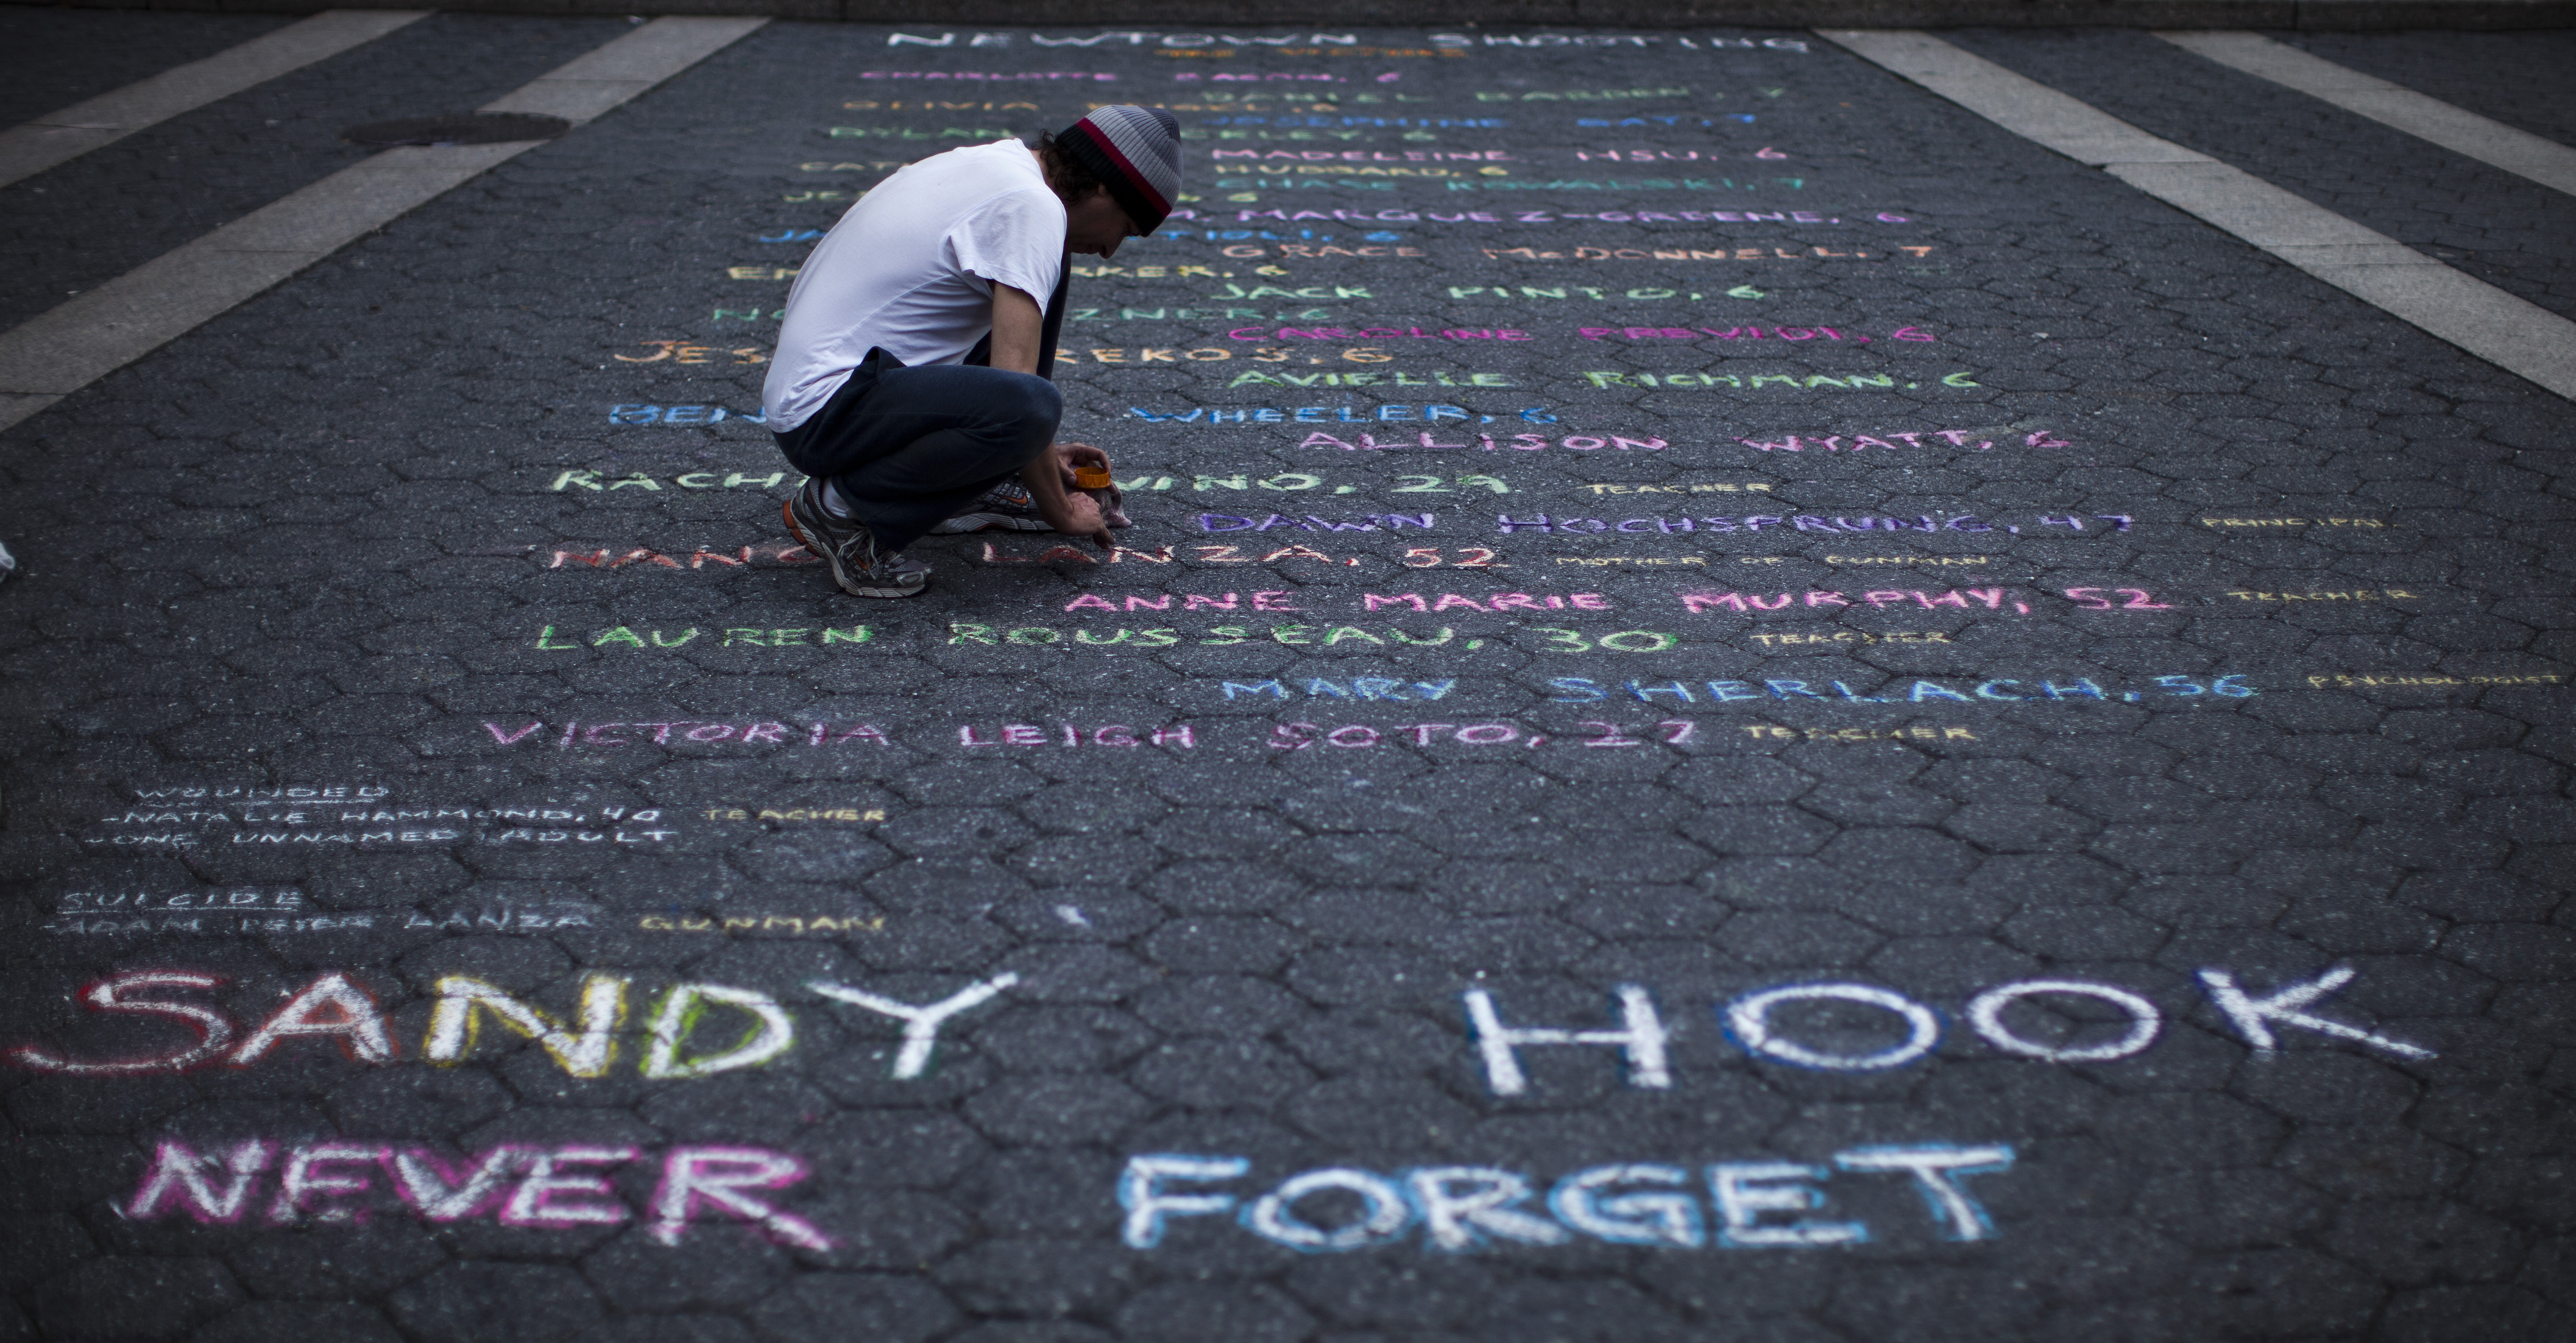 Street artist Mark Panzarino, 41, prepares a memorial as he writes the names of the Sandy Hook Elementary School victims during the six-month anniversary of the massacre, at Union Square in New York, June 14, 2013. Six months after a gunman killed 26 children and adults at the elementary school, families and local officials marked the day by honoring the victims and renewing the fight for stricter gun control. REUTERS/Eduardo Munoz (UNITED STATES - Tags: CIVIL UNREST EDUCATION CRIME LAW ANNIVERSARY TPX IMAGES OF THE DAY) - RTX10O9G